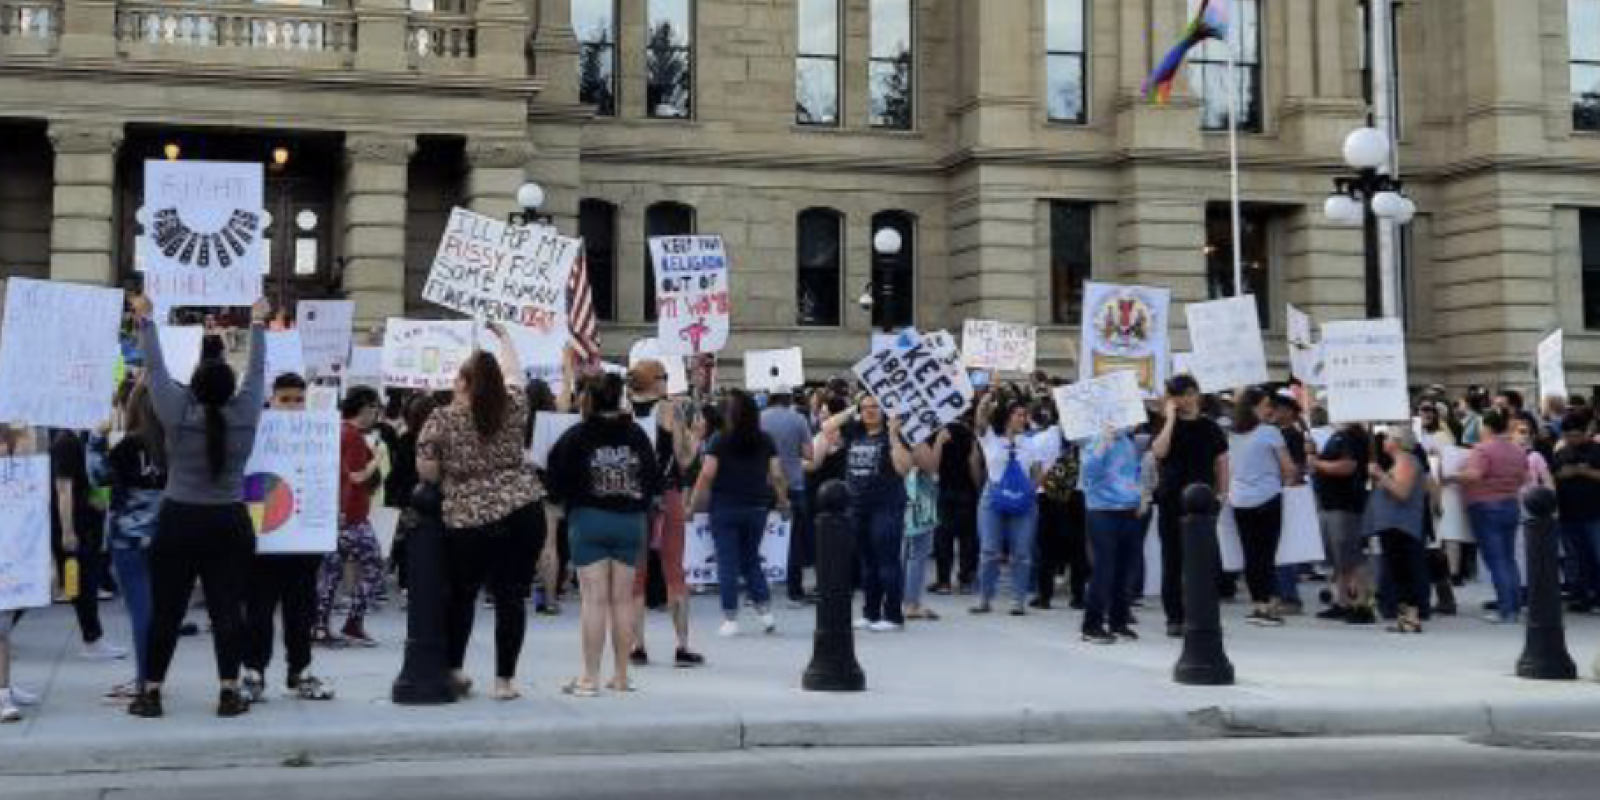 image of people protesting at the capitol in Cheyenne